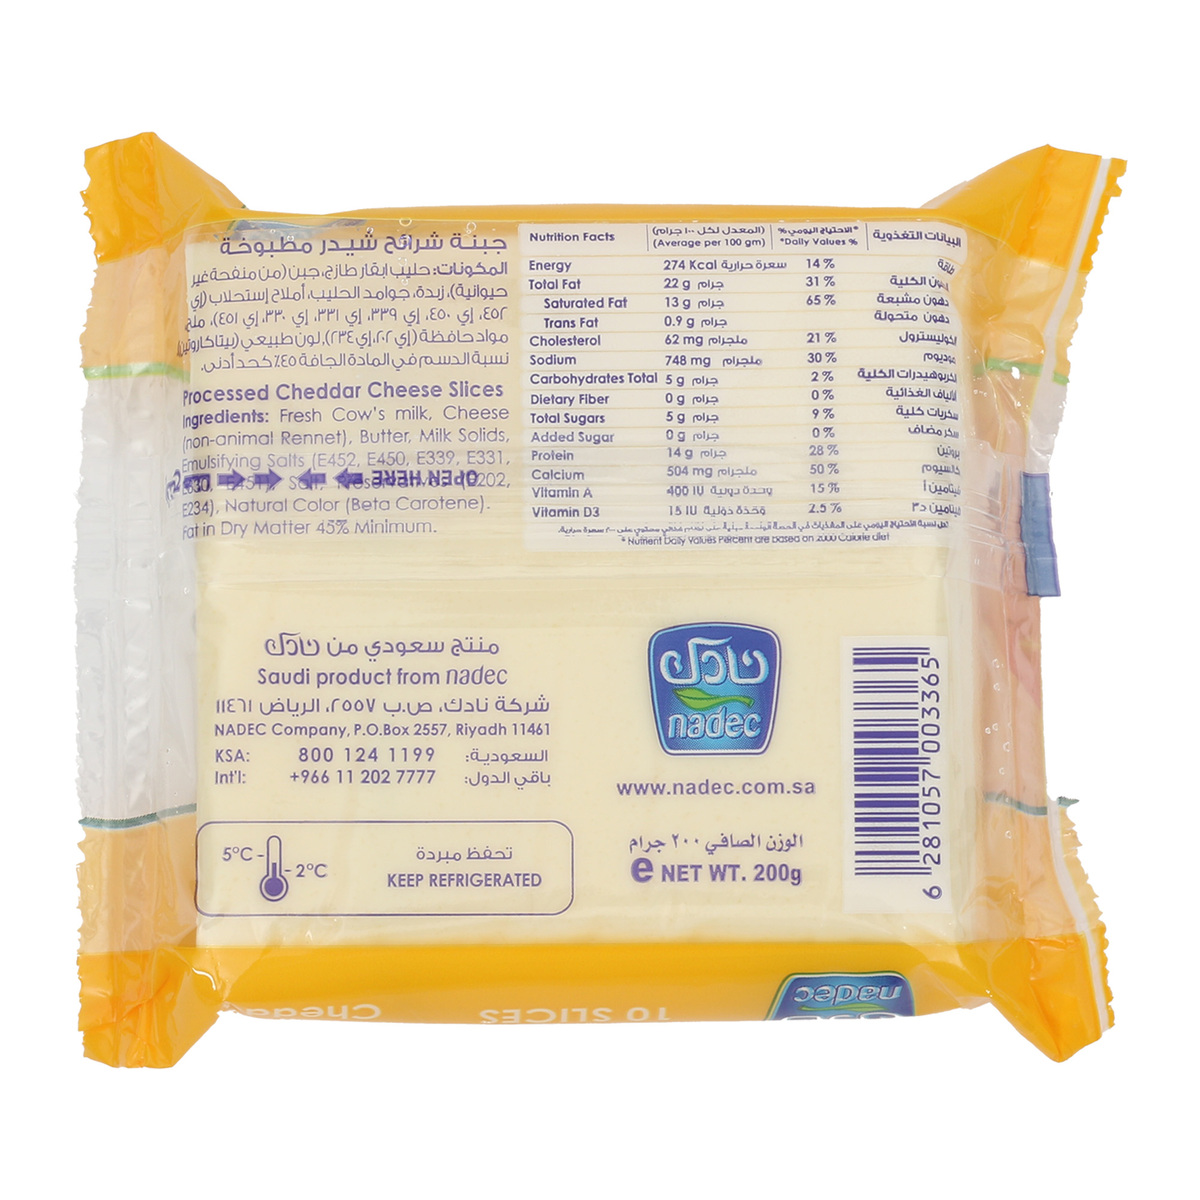 Nadec Cheddar Cheese Slices 200 g